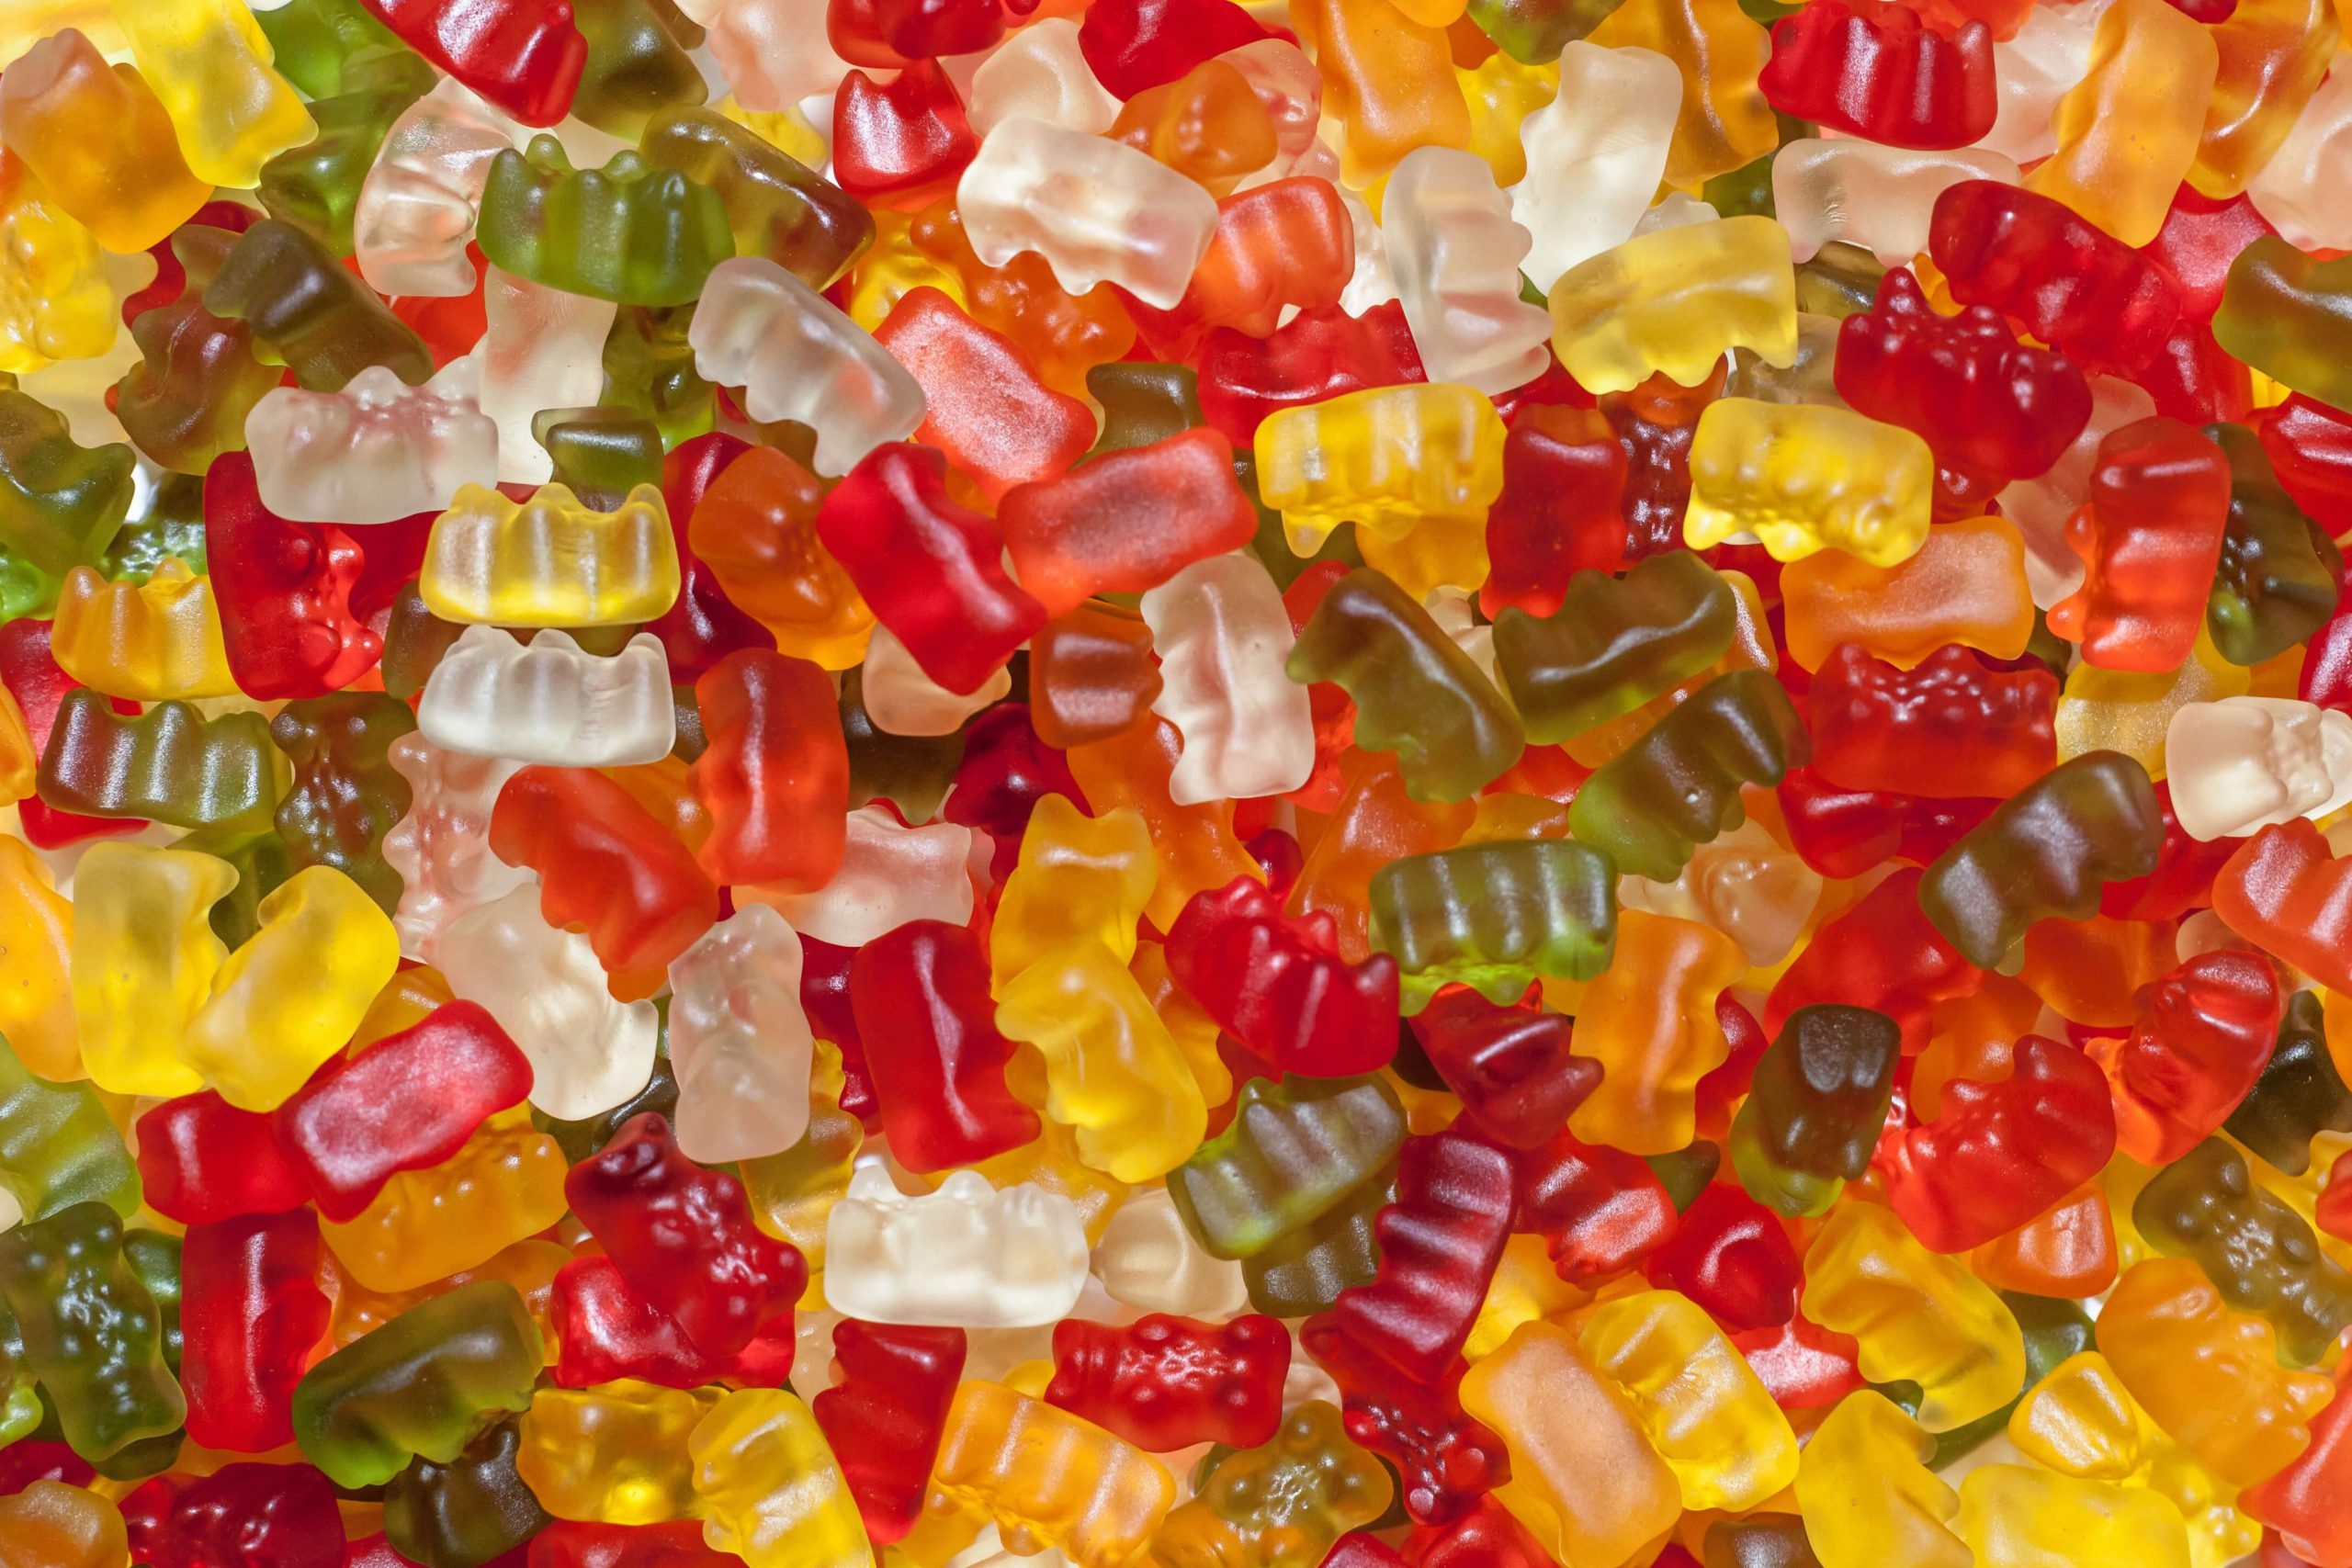 jelly bears in various colors